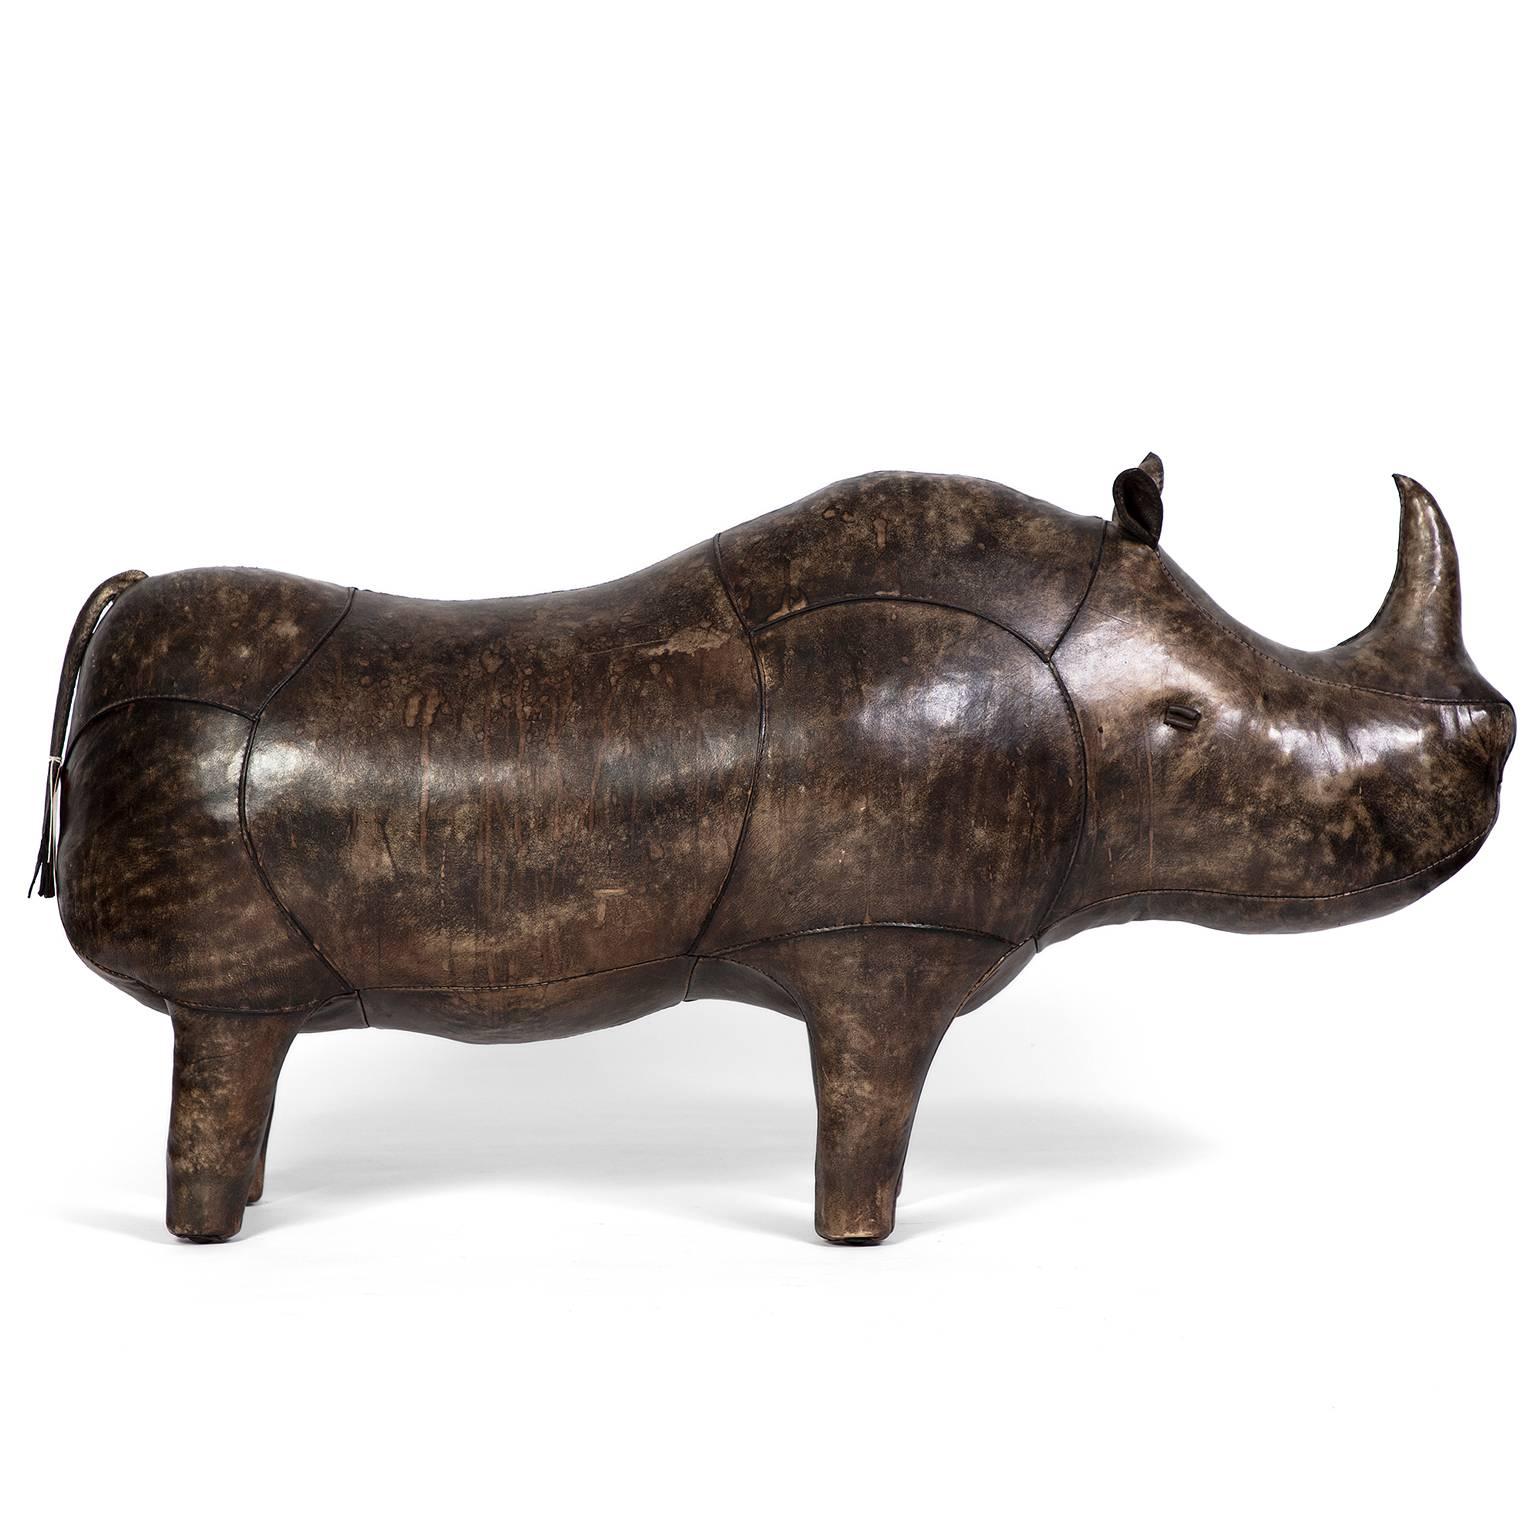 Since 1927, British company Omersa has made handcrafted leather animal footstools. In the 1960s, Abercrombie & Fitch commissioned a series of leather rhinos to use as display pieces in their American stores. An iconic Vogue photo shows Edie